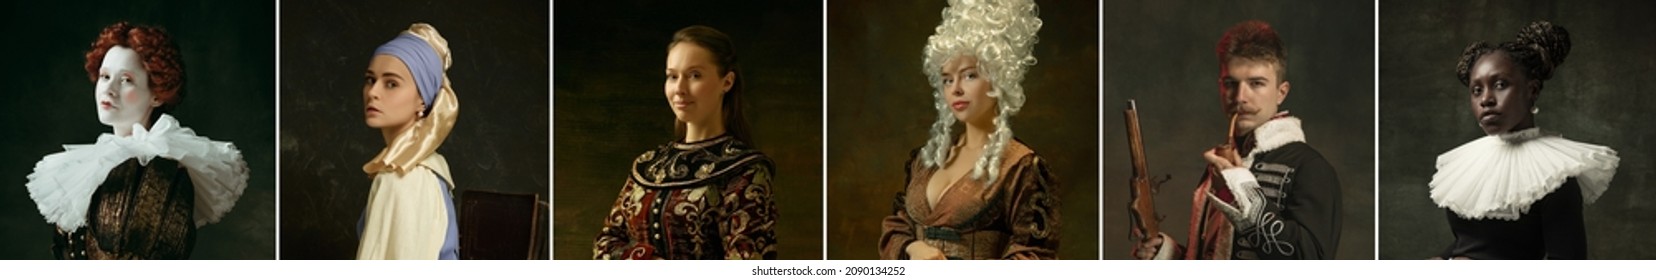 Composed and confident. Medieval people as a royalty persons in vintage clothing on dark background. Concept of comparison of eras, modernity and renaissance, baroque style. Creative collage. Flyer